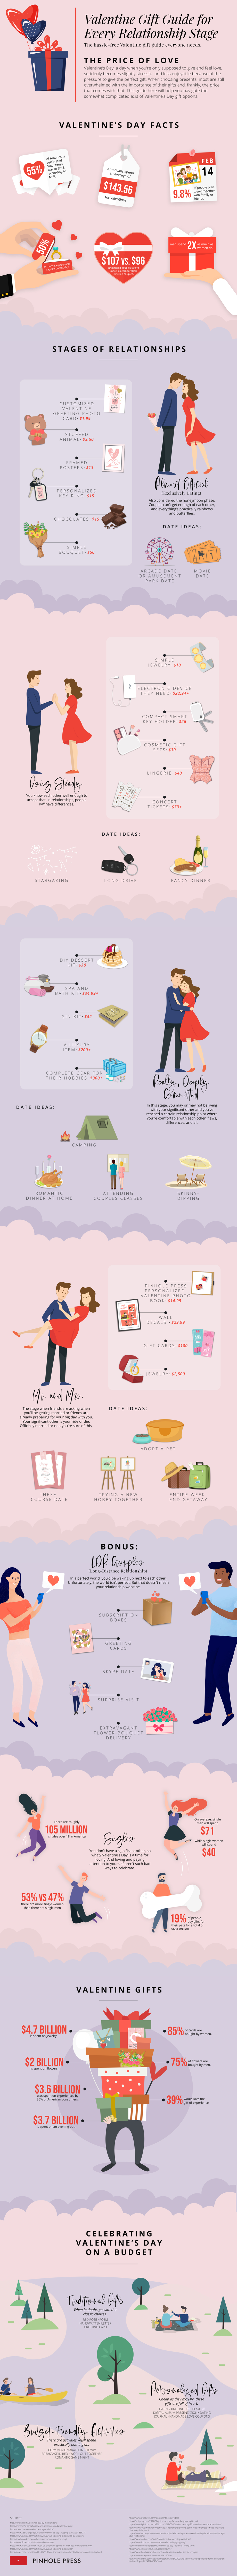 Valentine’s Day Gift and Date Ideas for Every Relationship Stage